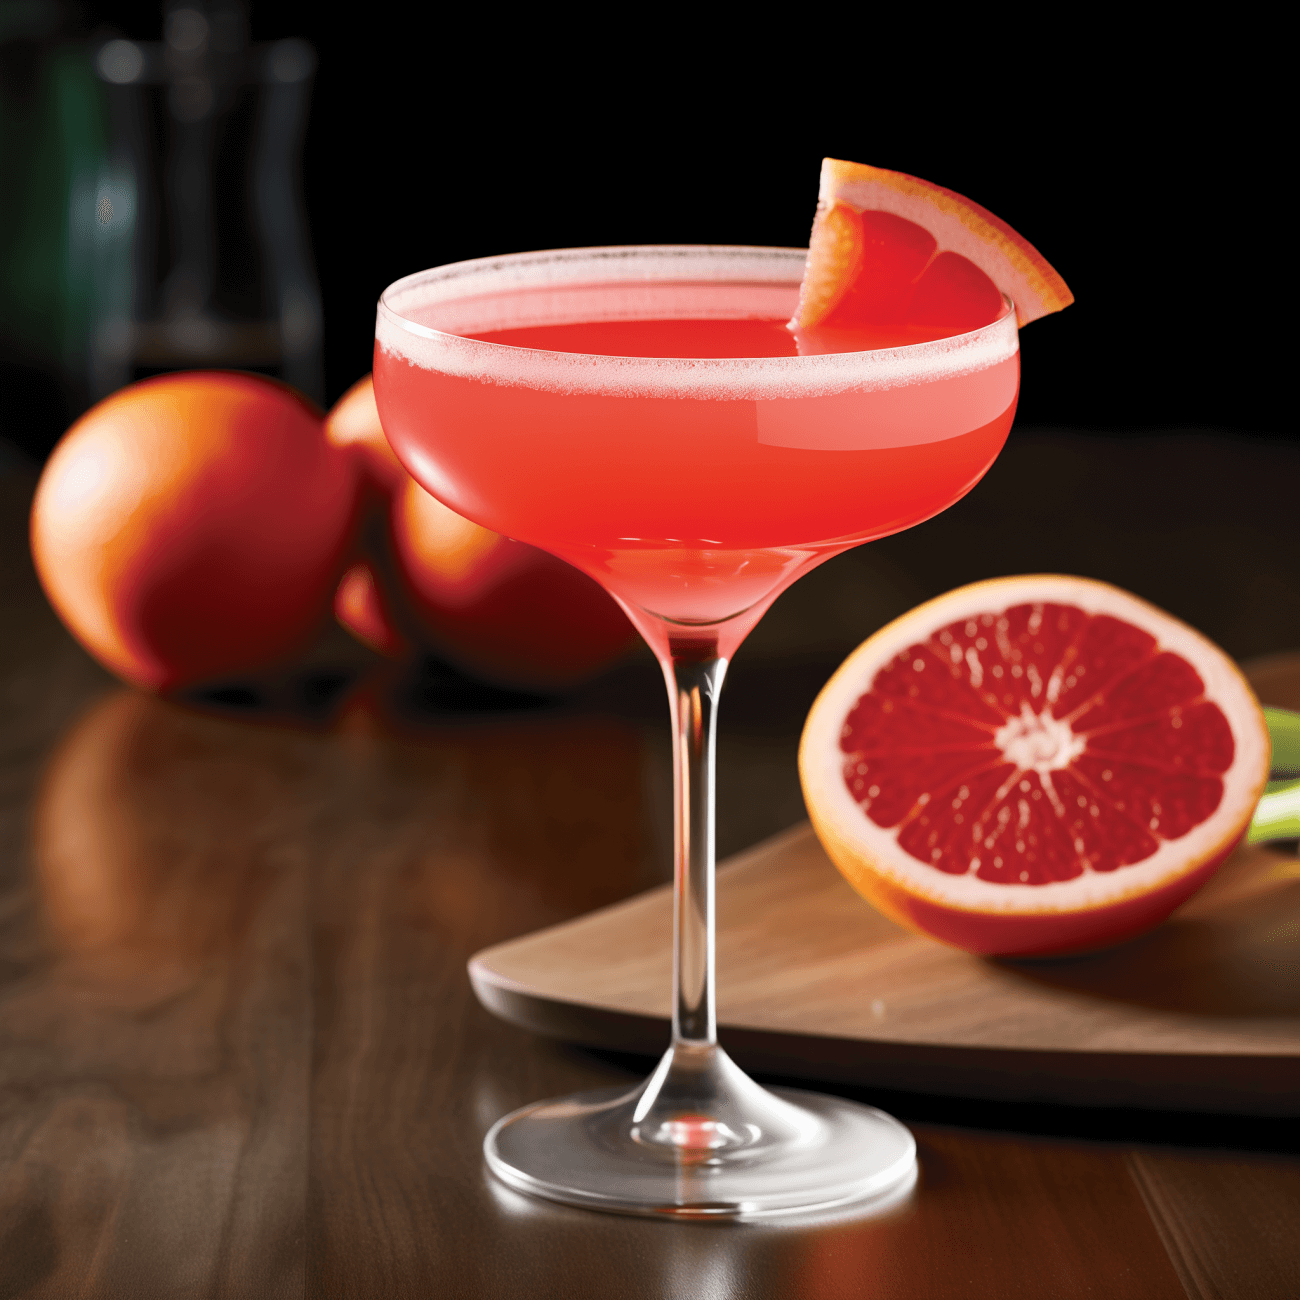 Nirvana Cocktail Recipe - The Nirvana cocktail is a harmonious blend of bitter, sweet, and sour. The bitterness of the Campari and Aperol is balanced by the sweetness of the gin and the tartness of the grapefruit juice. It's a strong, yet refreshing cocktail with a complex flavor profile.